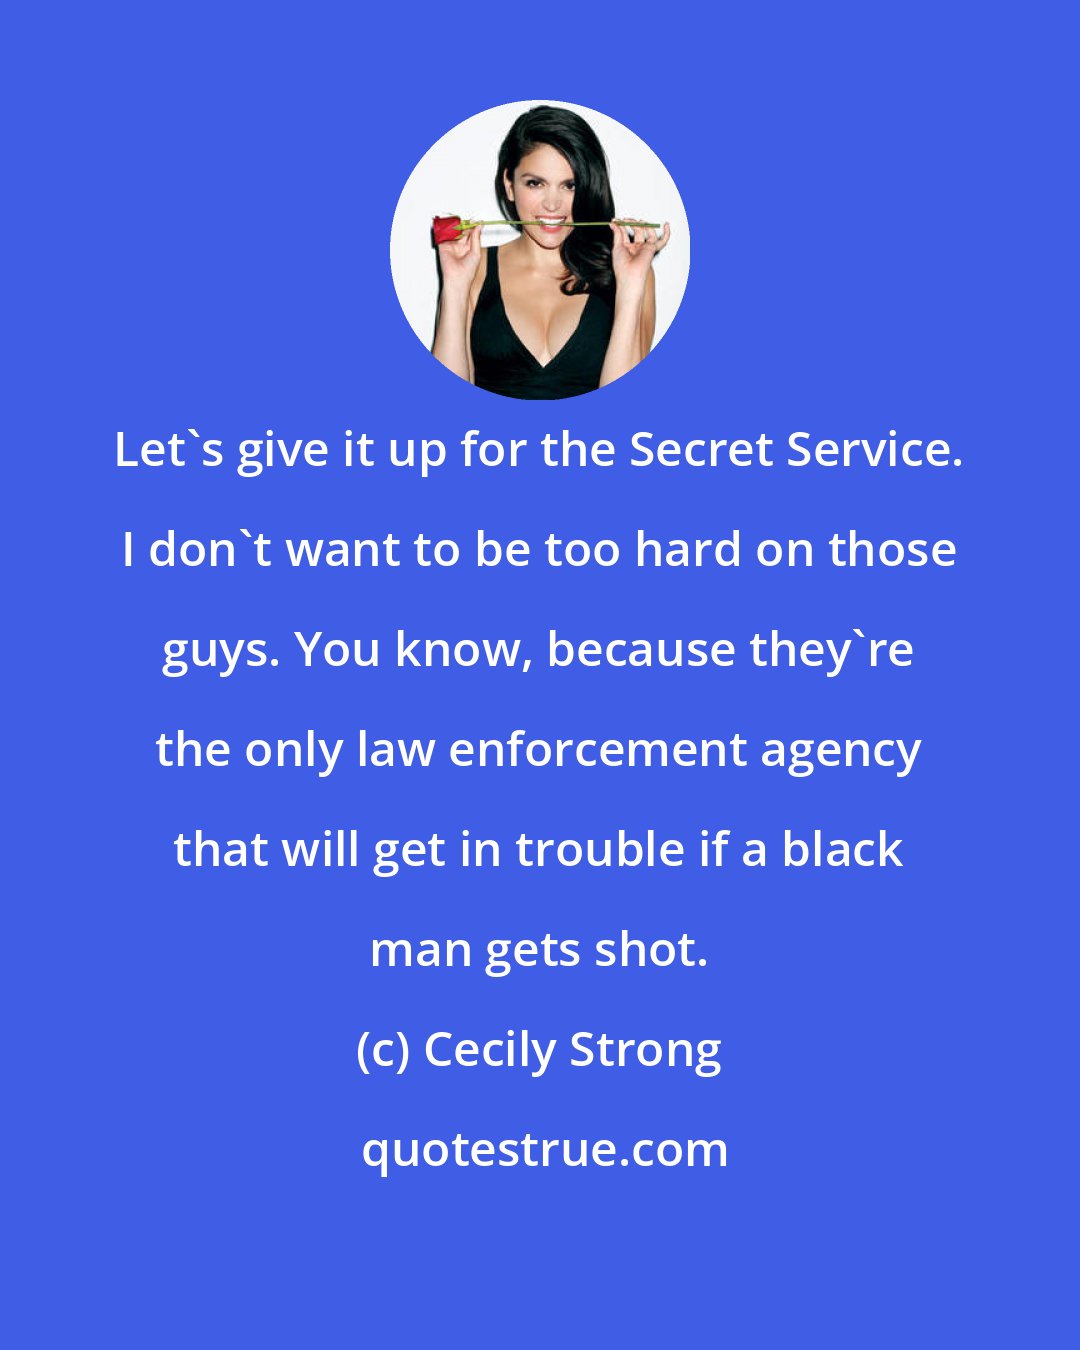 Cecily Strong: Let's give it up for the Secret Service. I don't want to be too hard on those guys. You know, because they're the only law enforcement agency that will get in trouble if a black man gets shot.